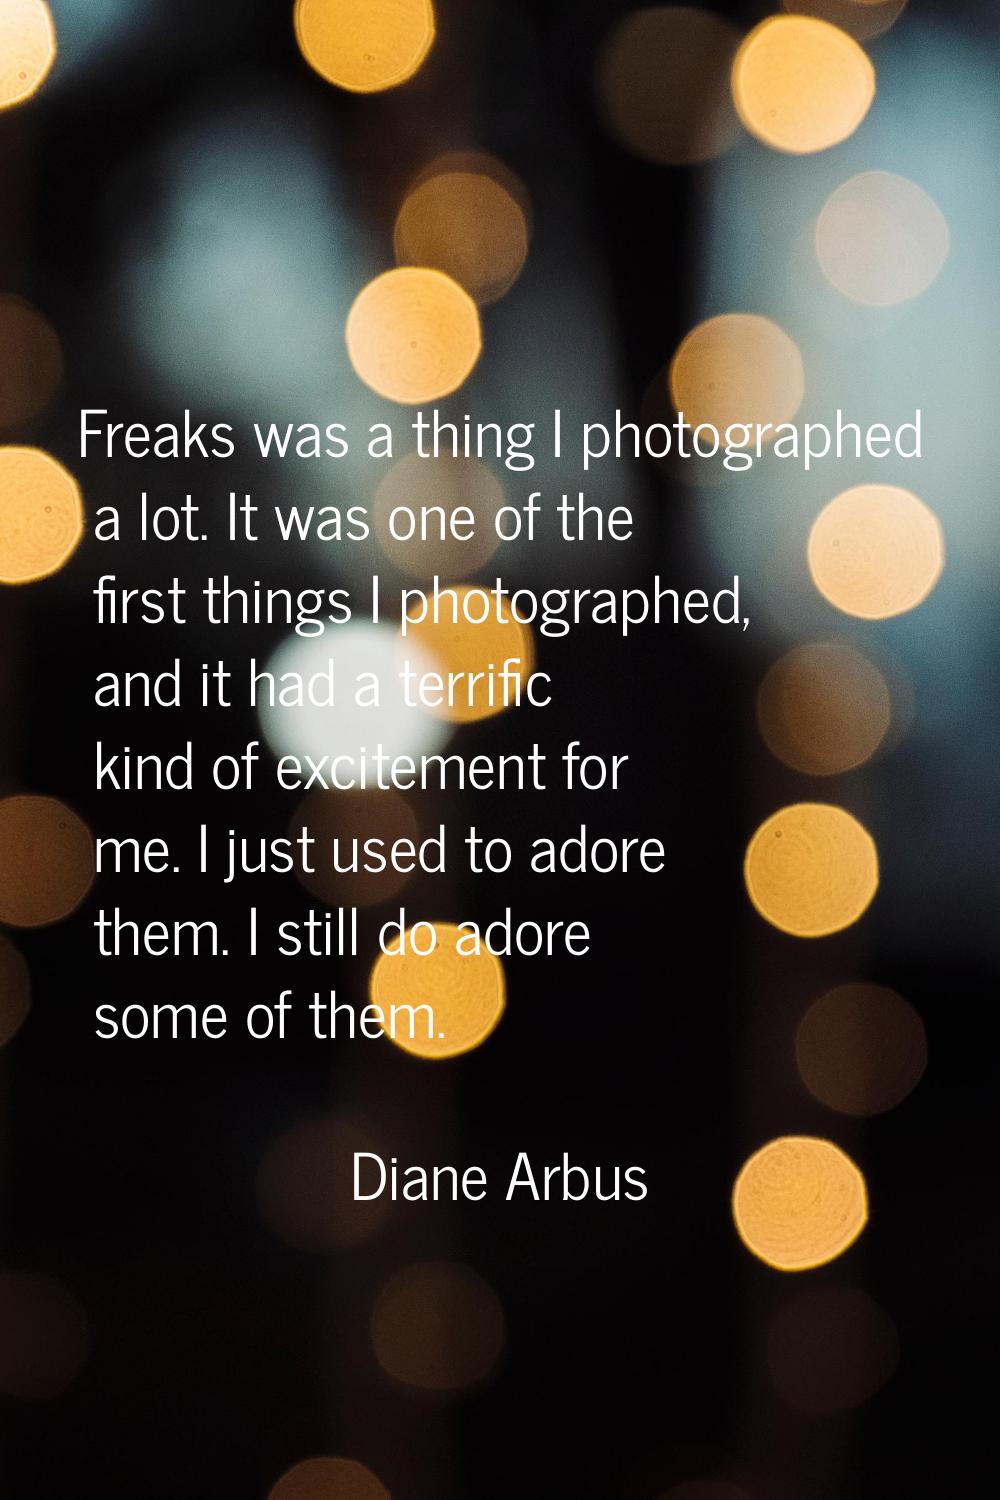 Freaks was a thing I photographed a lot. It was one of the first things I photographed, and it had 